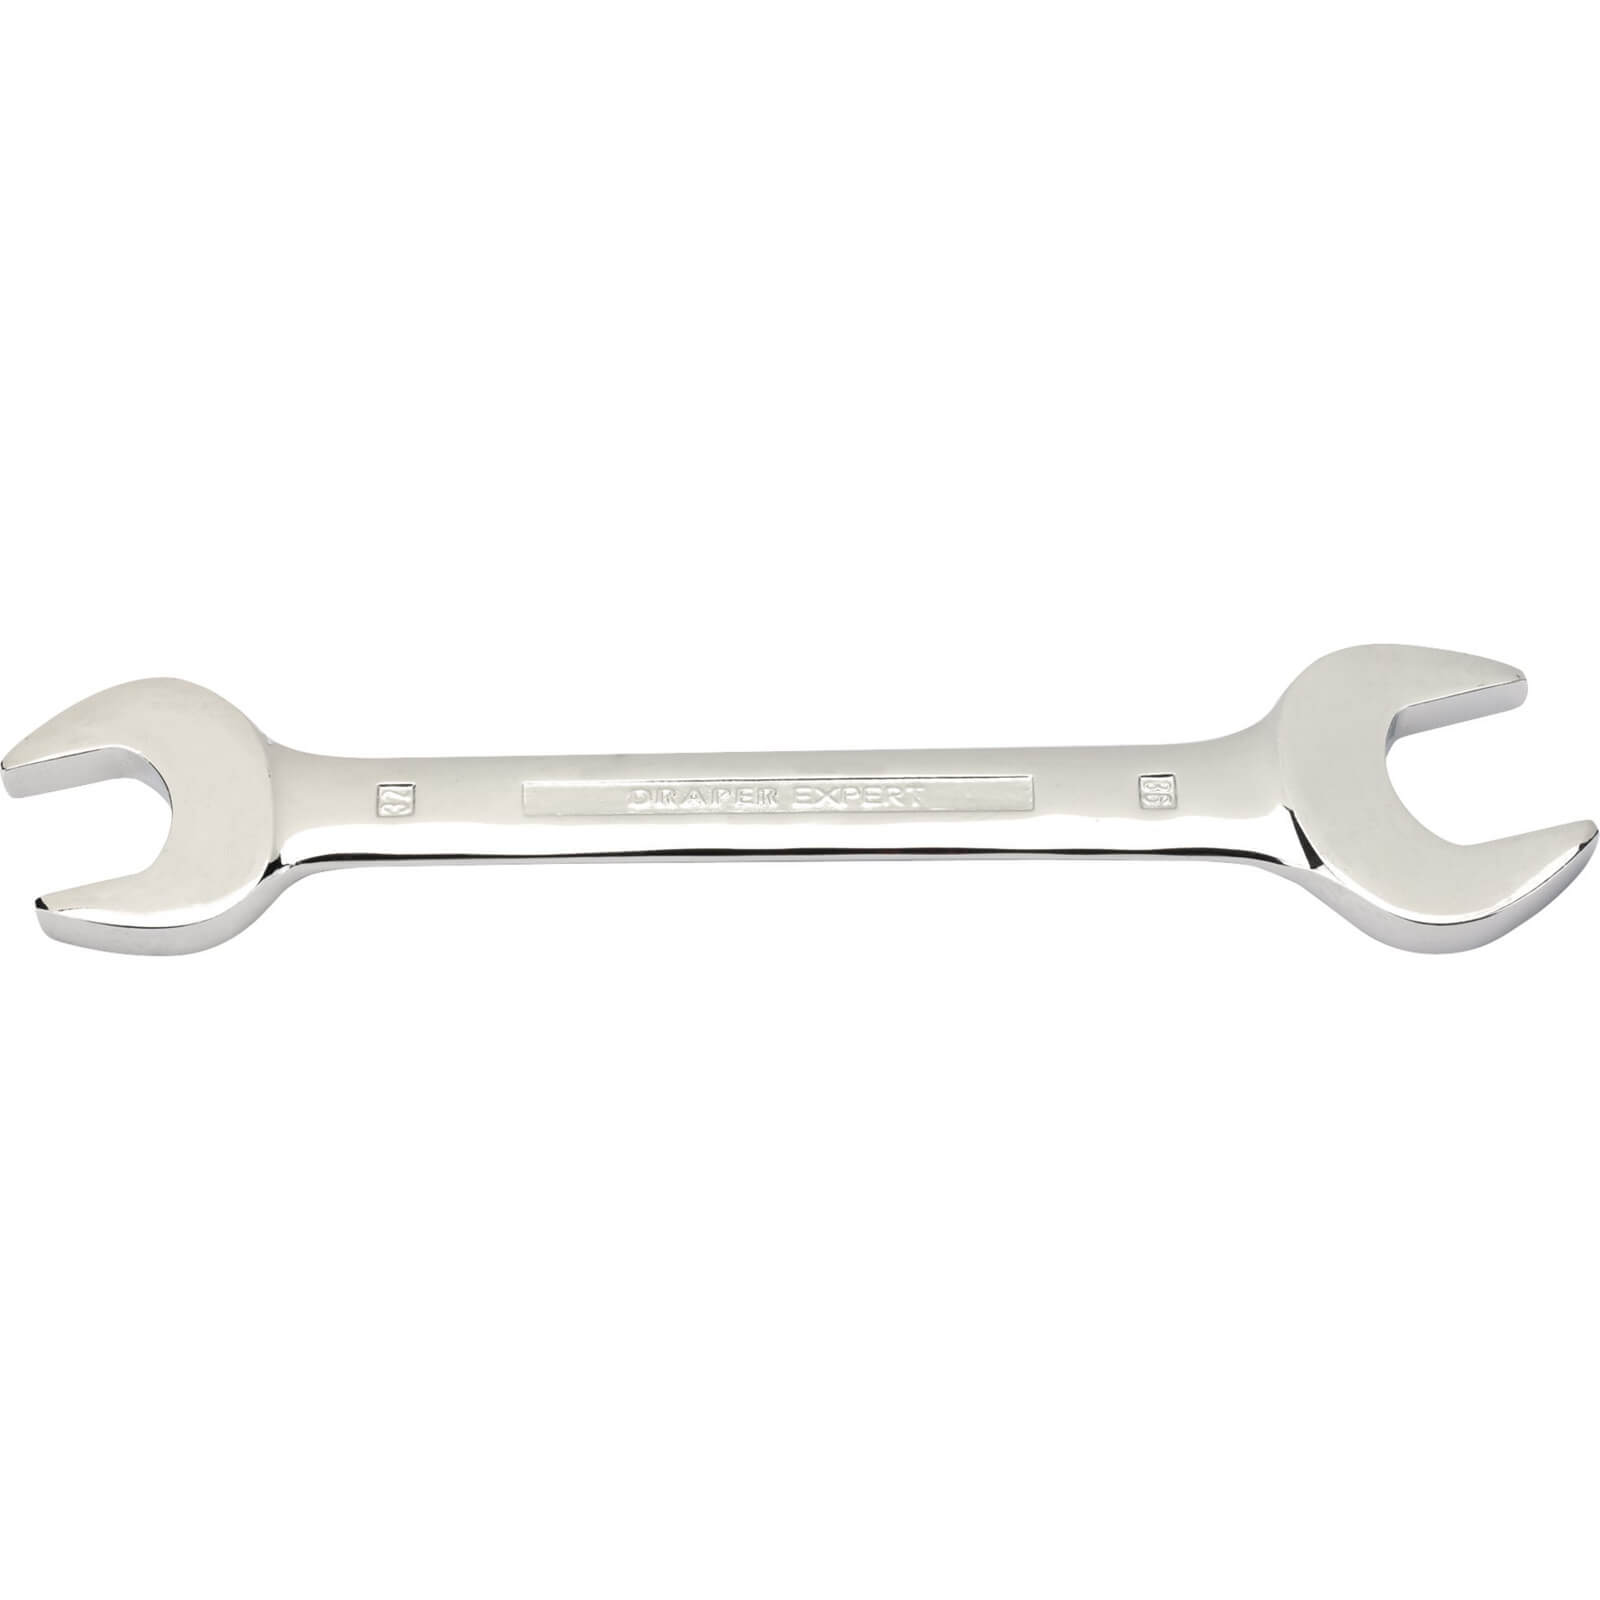 Image of Draper Expert Double Open Ended Spanner Metric 32mm x 36mm